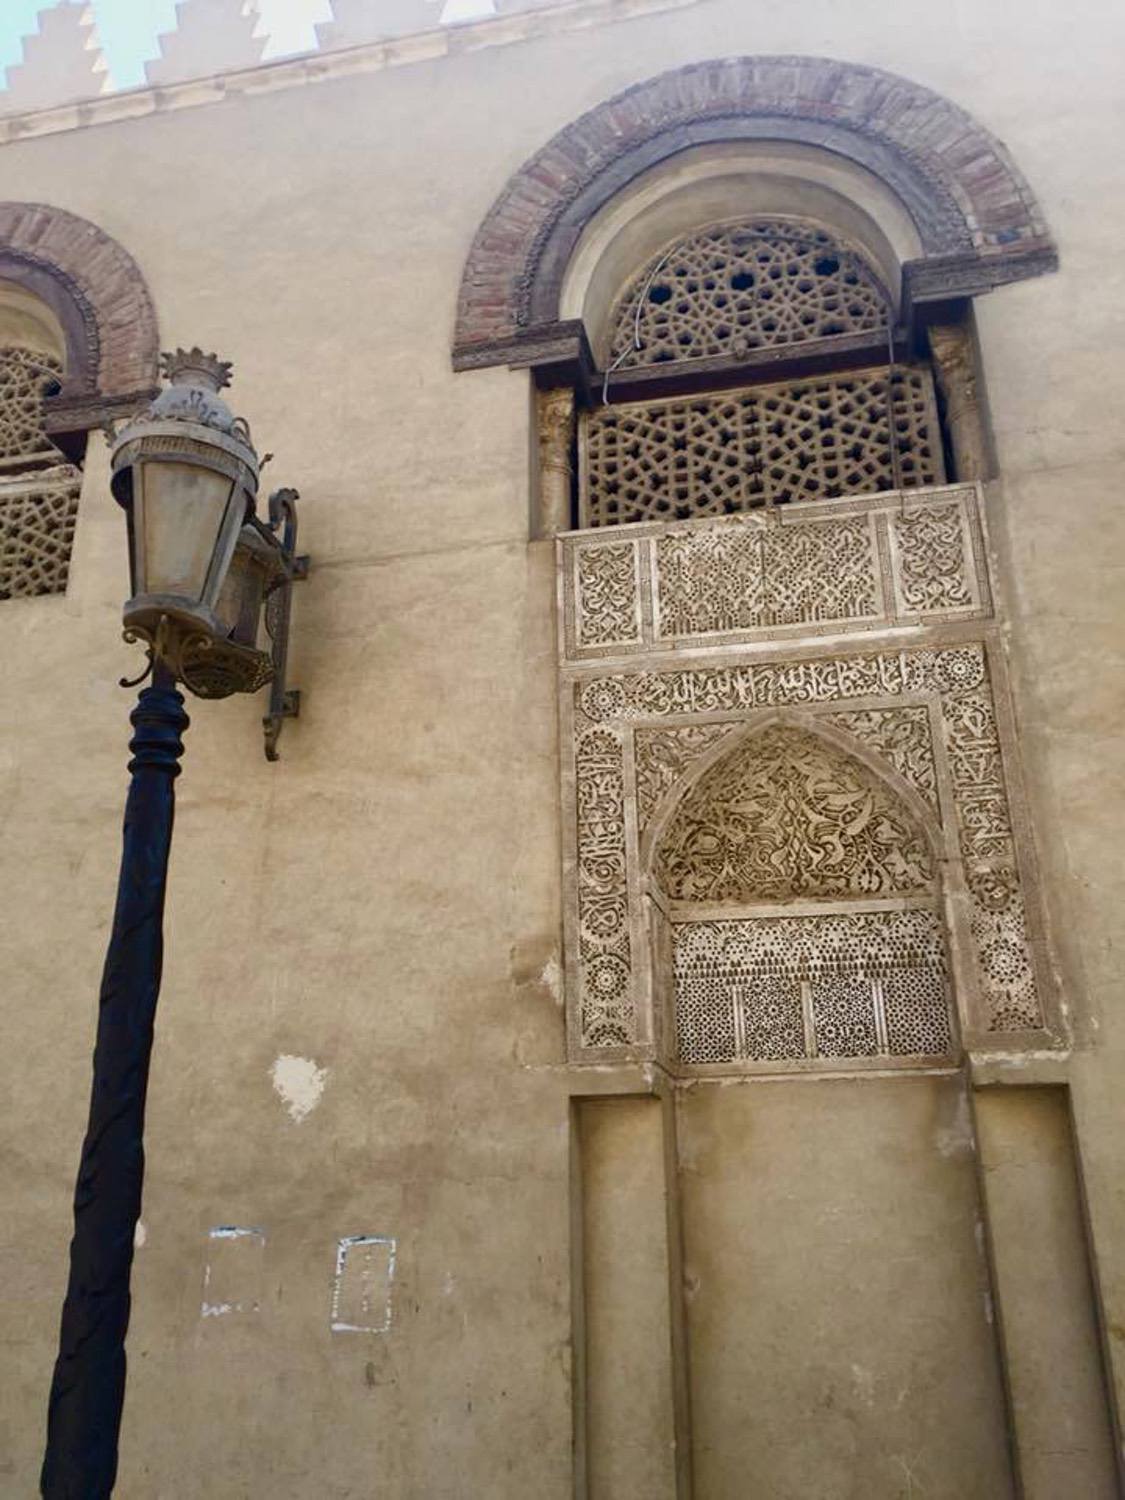 Jami' 'Amr ibn al-'As - Detail view of a niche in the exterior façade, with calligrpahic and floral decoration, and window screen 